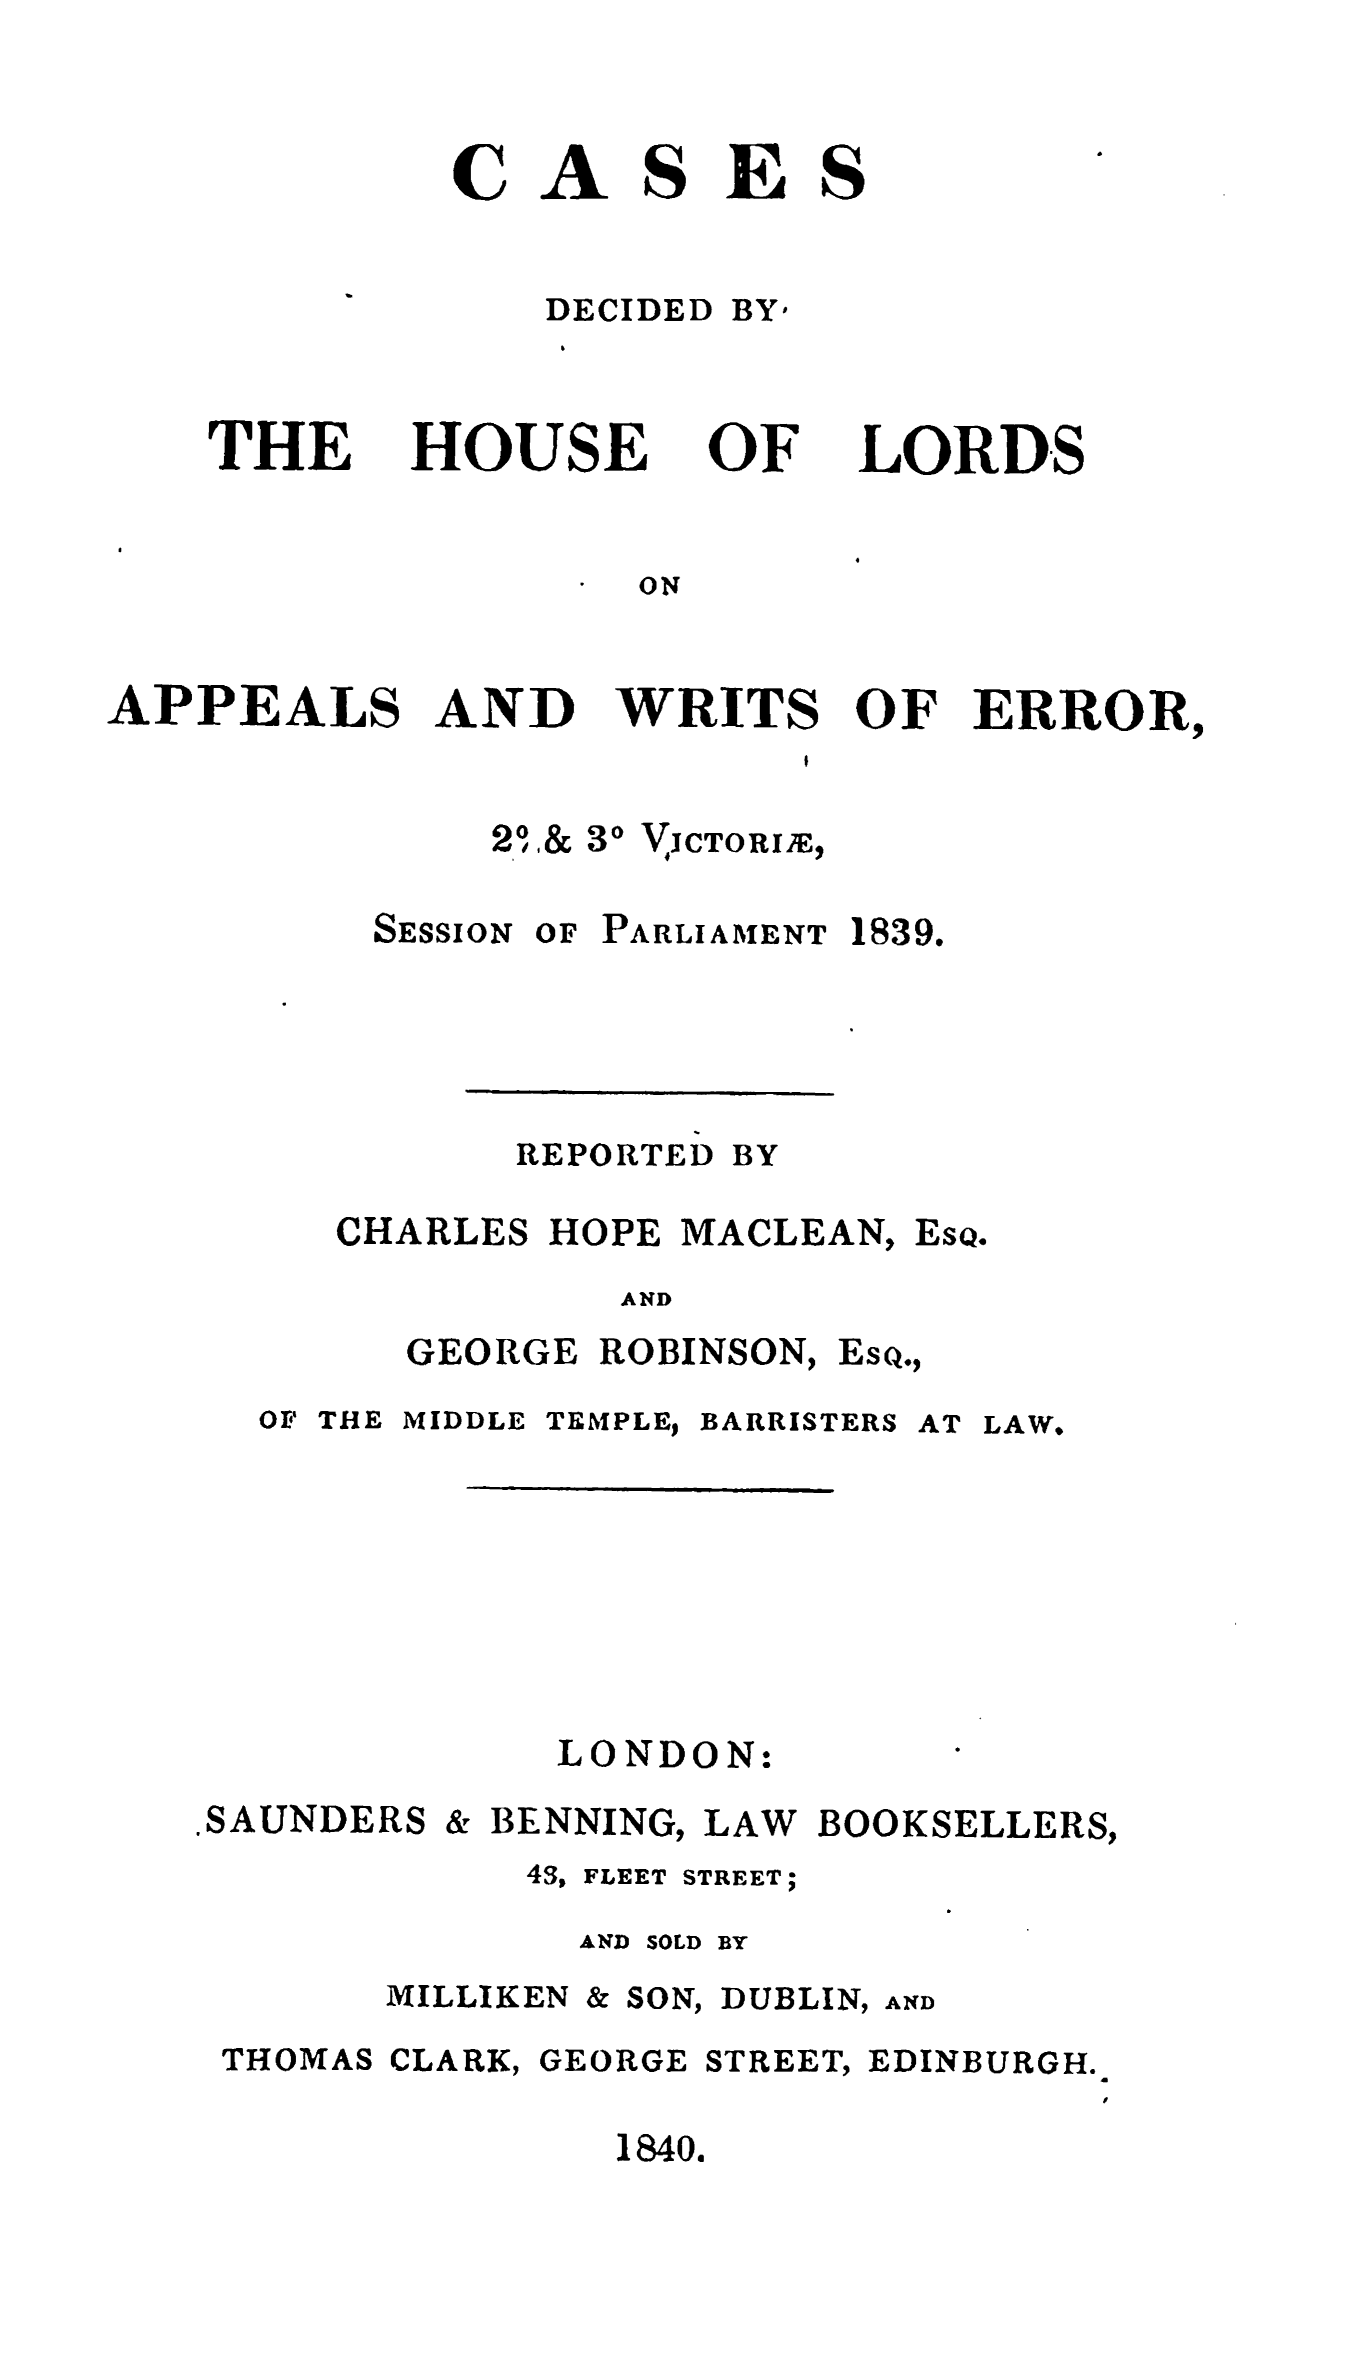 handle is hein.stair/cdapwre0001 and id is 1 raw text is: 


AS


ES


DECIDED


THE


HOUSE


OF


LORDS


ON


AND


WRITS


OF ERROR,


30 VJCTORIIE,


SESSION


OF PARLIAMENT


1839.


REPORTED


BY


CHARLES HOPE MACLEAN,


EsQ.


AND


GEORGE


ROBINSON,


Esq.,


OF THE MIDDLE


TEMPLEJ


BARRISTERS


AT LAW,


LONDON:


,SAUNDERS


& BENNING,


LAW


BOOKSELLERS,


43, FLEET


STREET;


AND SOLD BY


MILLIKEN


& SON,


DUBLIN,


THOMAS


CLARK,


GEORGE


STREET,


EDINBURGH.


1840.


C


BY*


APPEALS


AND


21 1&


